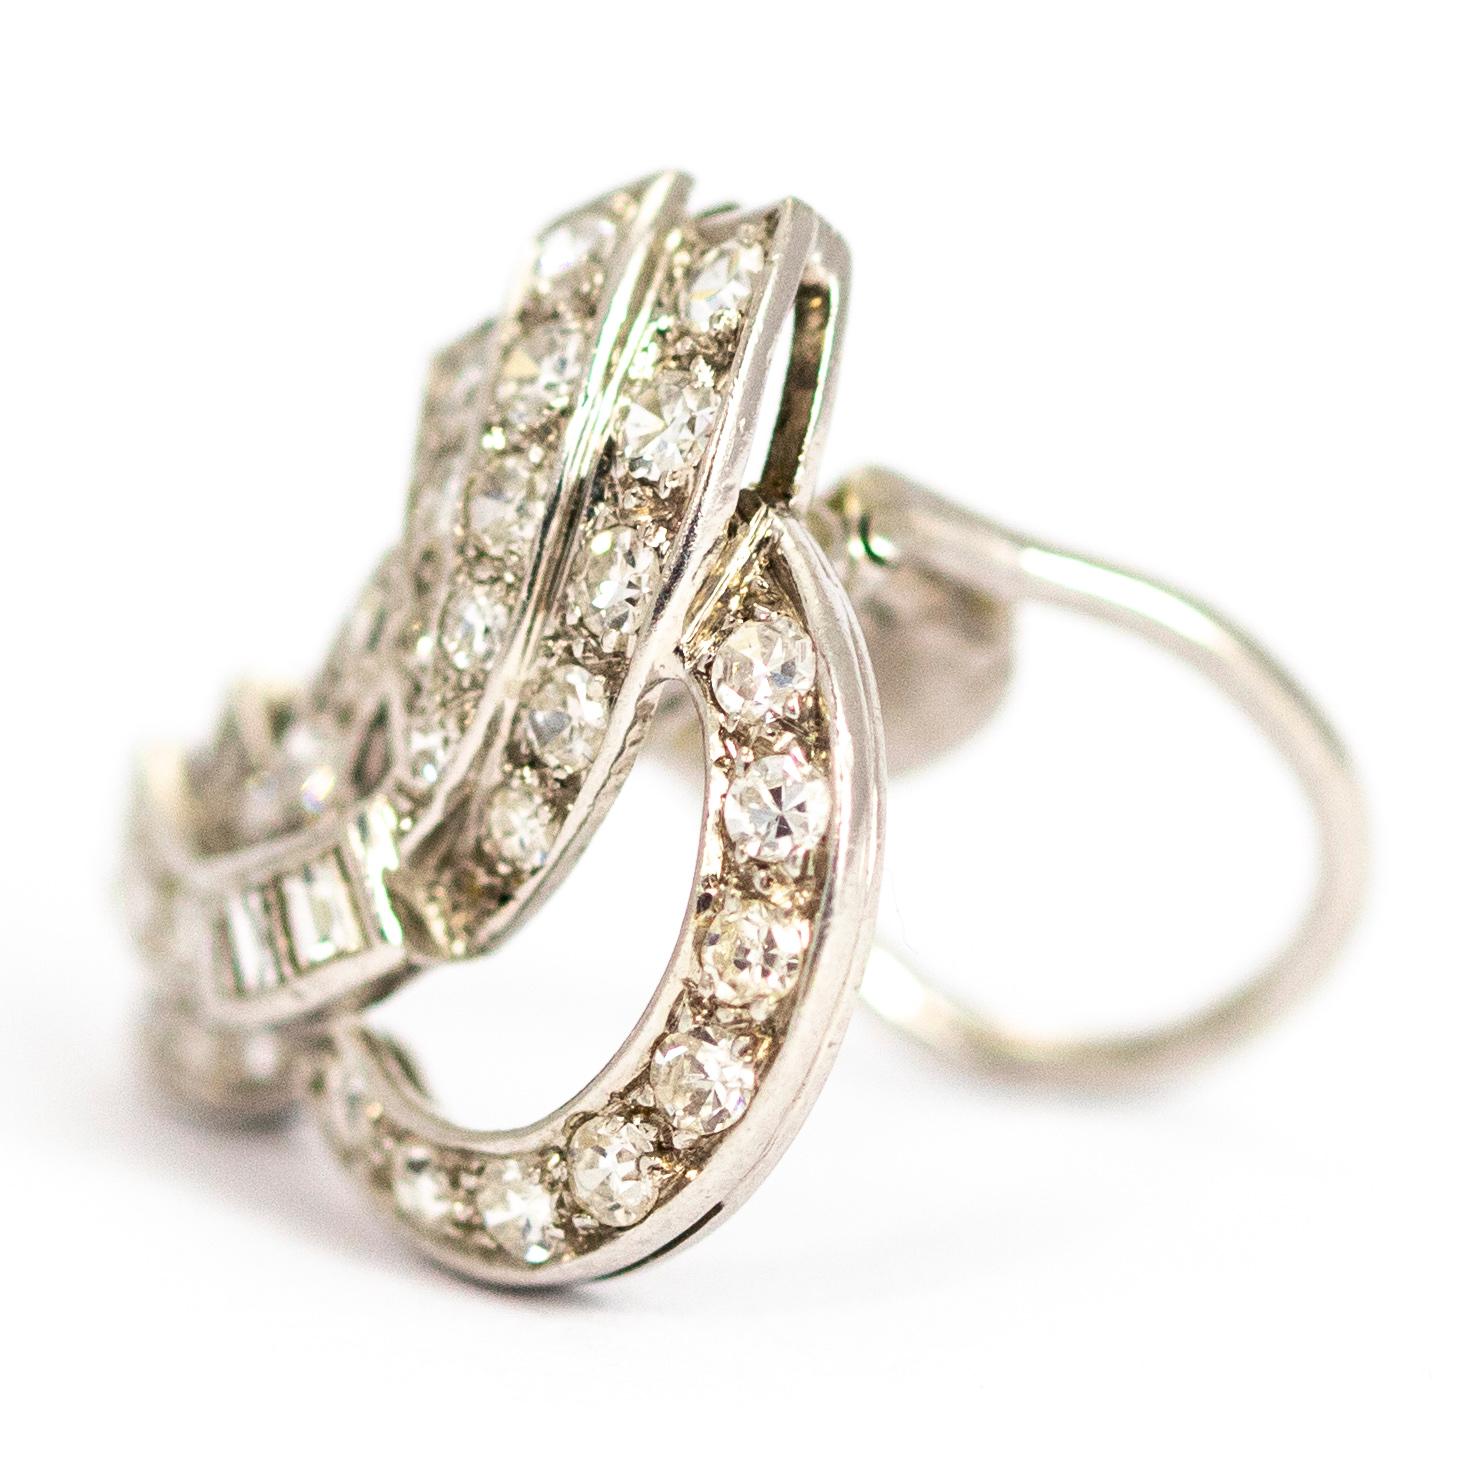 An exquisite clip brooch from the Art Deco period, circa 1930. It is beautifully shaped and fully set with 34 stunning princess cut and round cut white diamonds. The total diamond weight in this clip is approximately 78 points. Fully modelled in